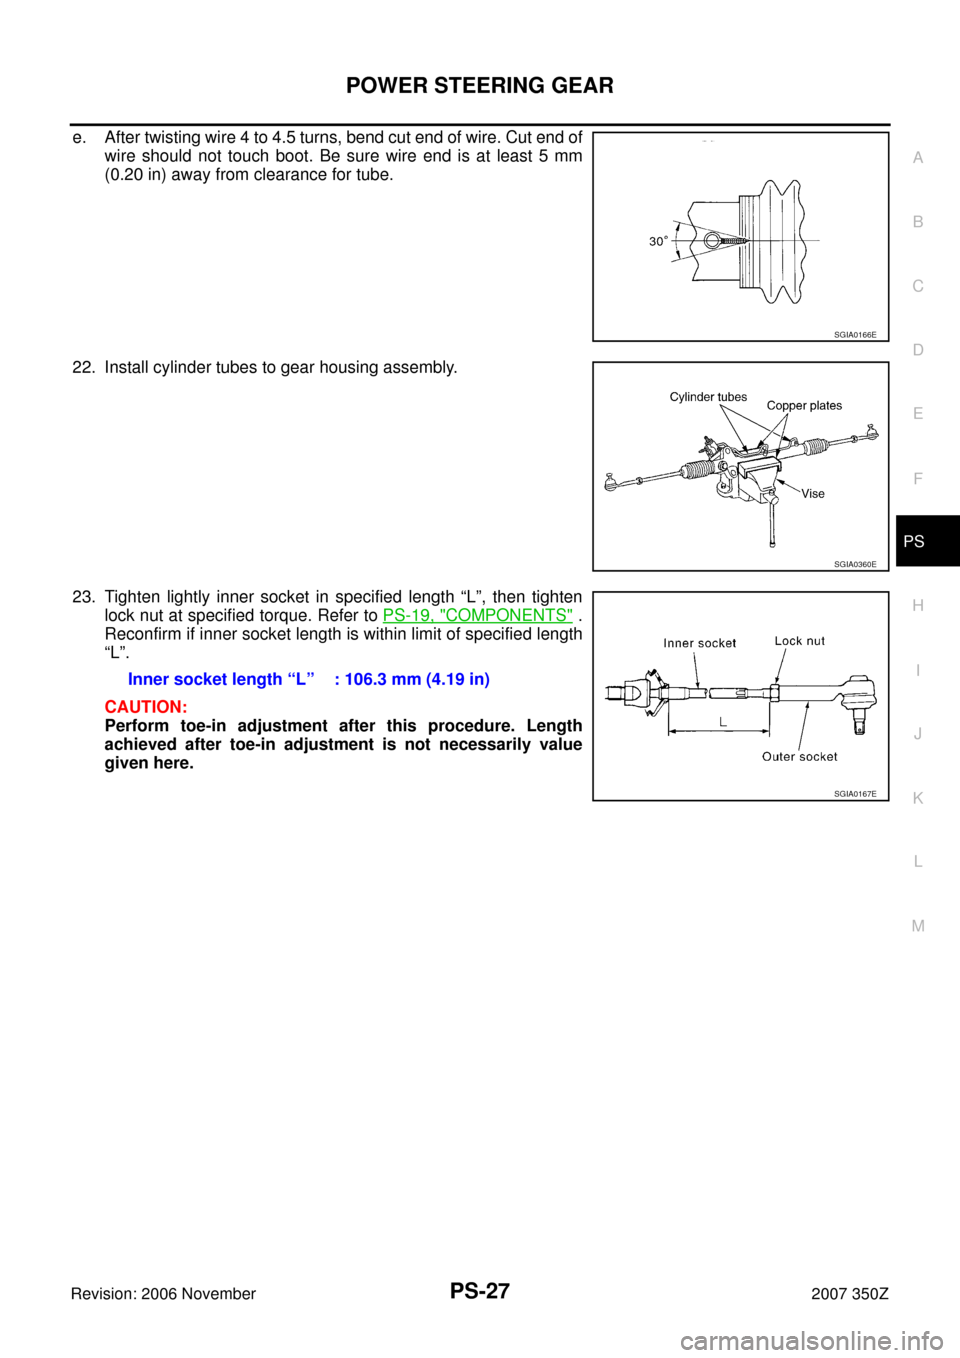 NISSAN 350Z 2007 Z33 Power Steering System Workshop Manual POWER STEERING GEAR
PS-27
C
D
E
F
H
I
J
K
L
MA
B
PS
Revision: 2006 November2007 350Z
e. After twisting wire 4 to 4.5 turns, bend cut end of wire. Cut end of
wire should not touch boot. Be sure wire en